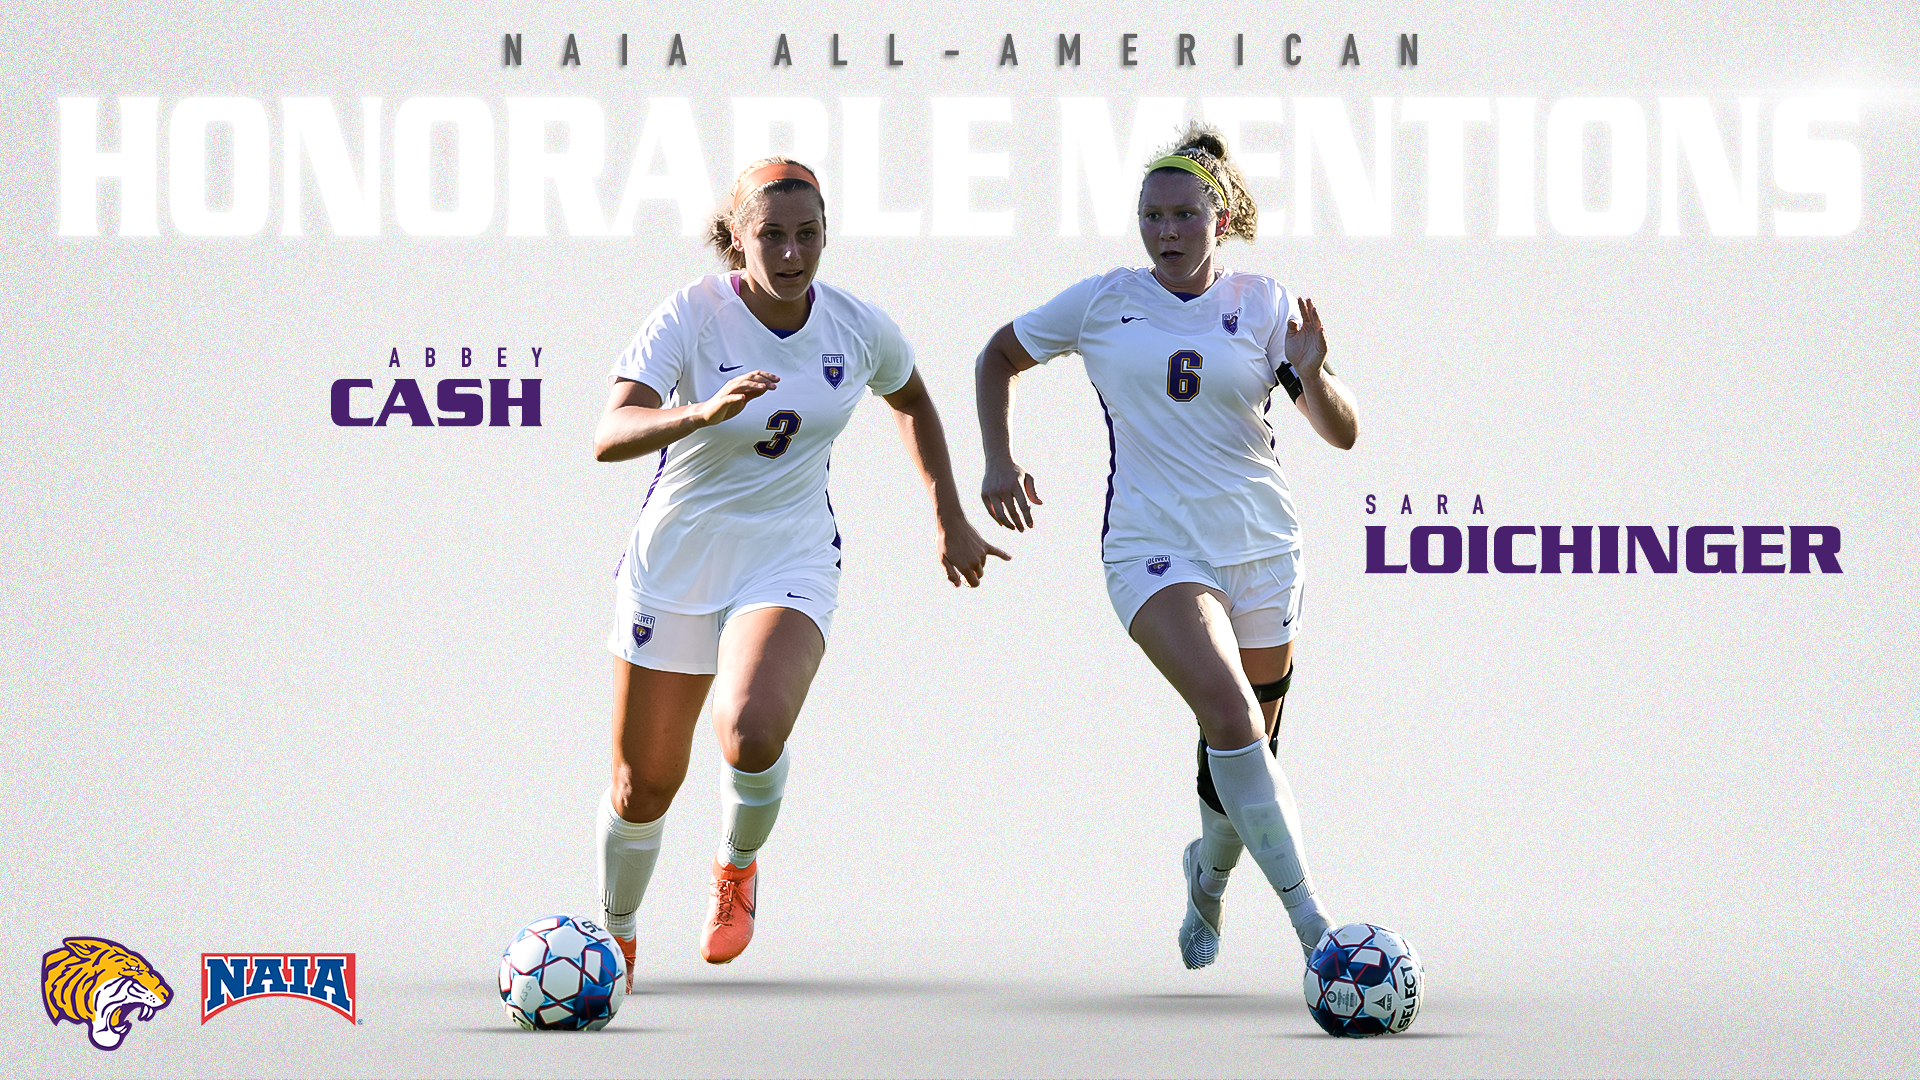 CASH AND LOICHINGER SELECTED AS NAIA ALL-AMERICA HONORABLE MENTIONS